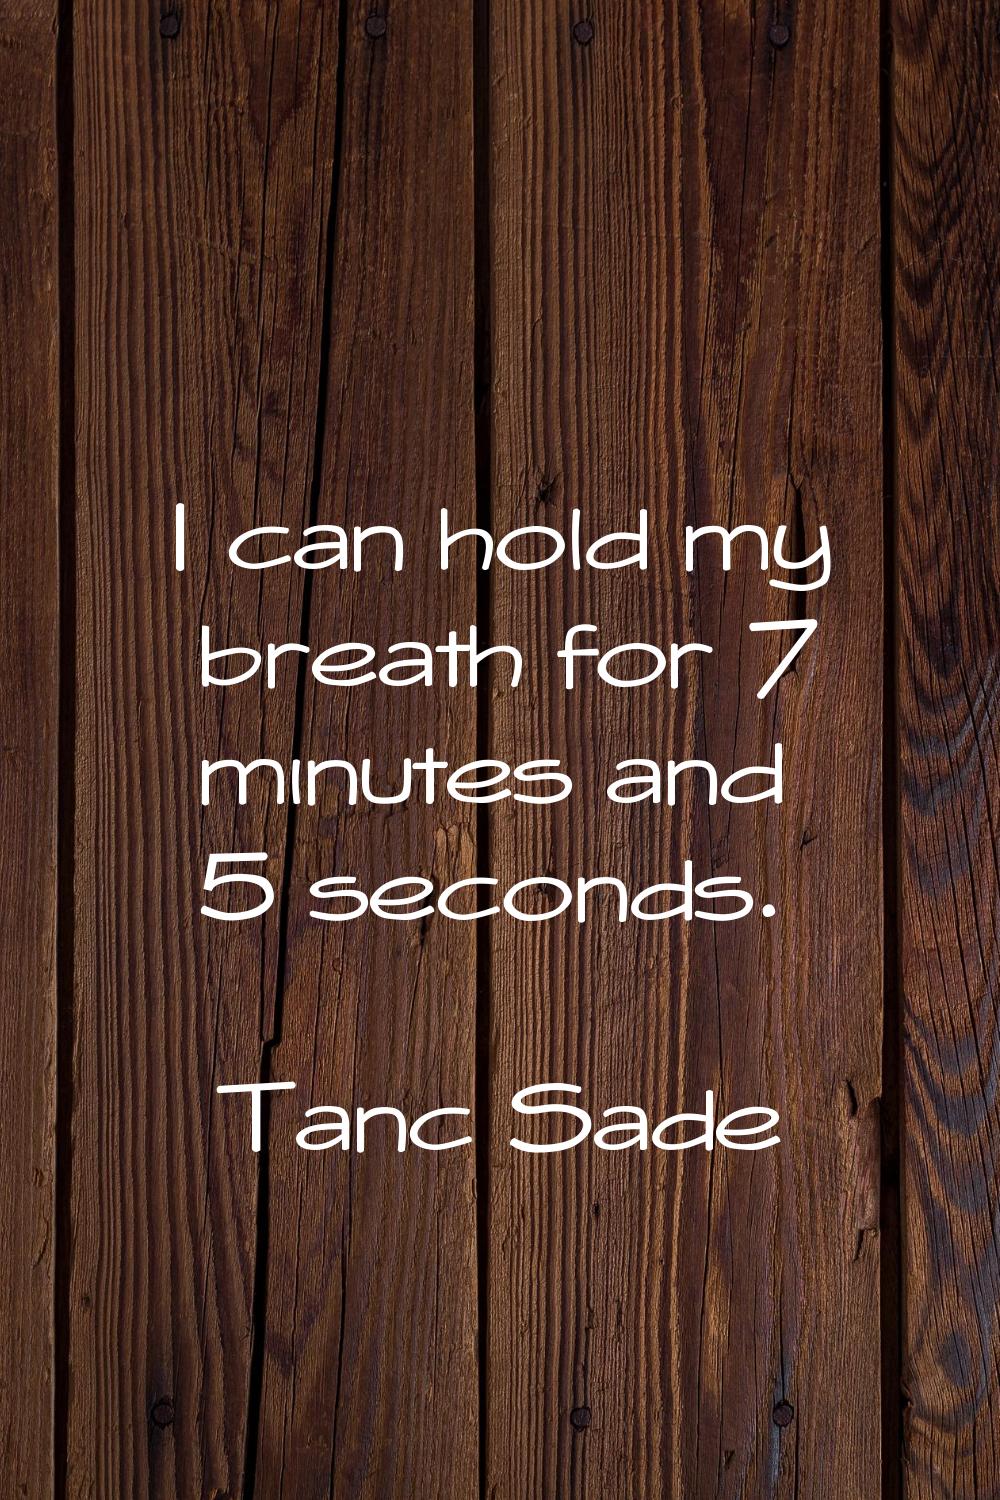 I can hold my breath for 7 minutes and 5 seconds.